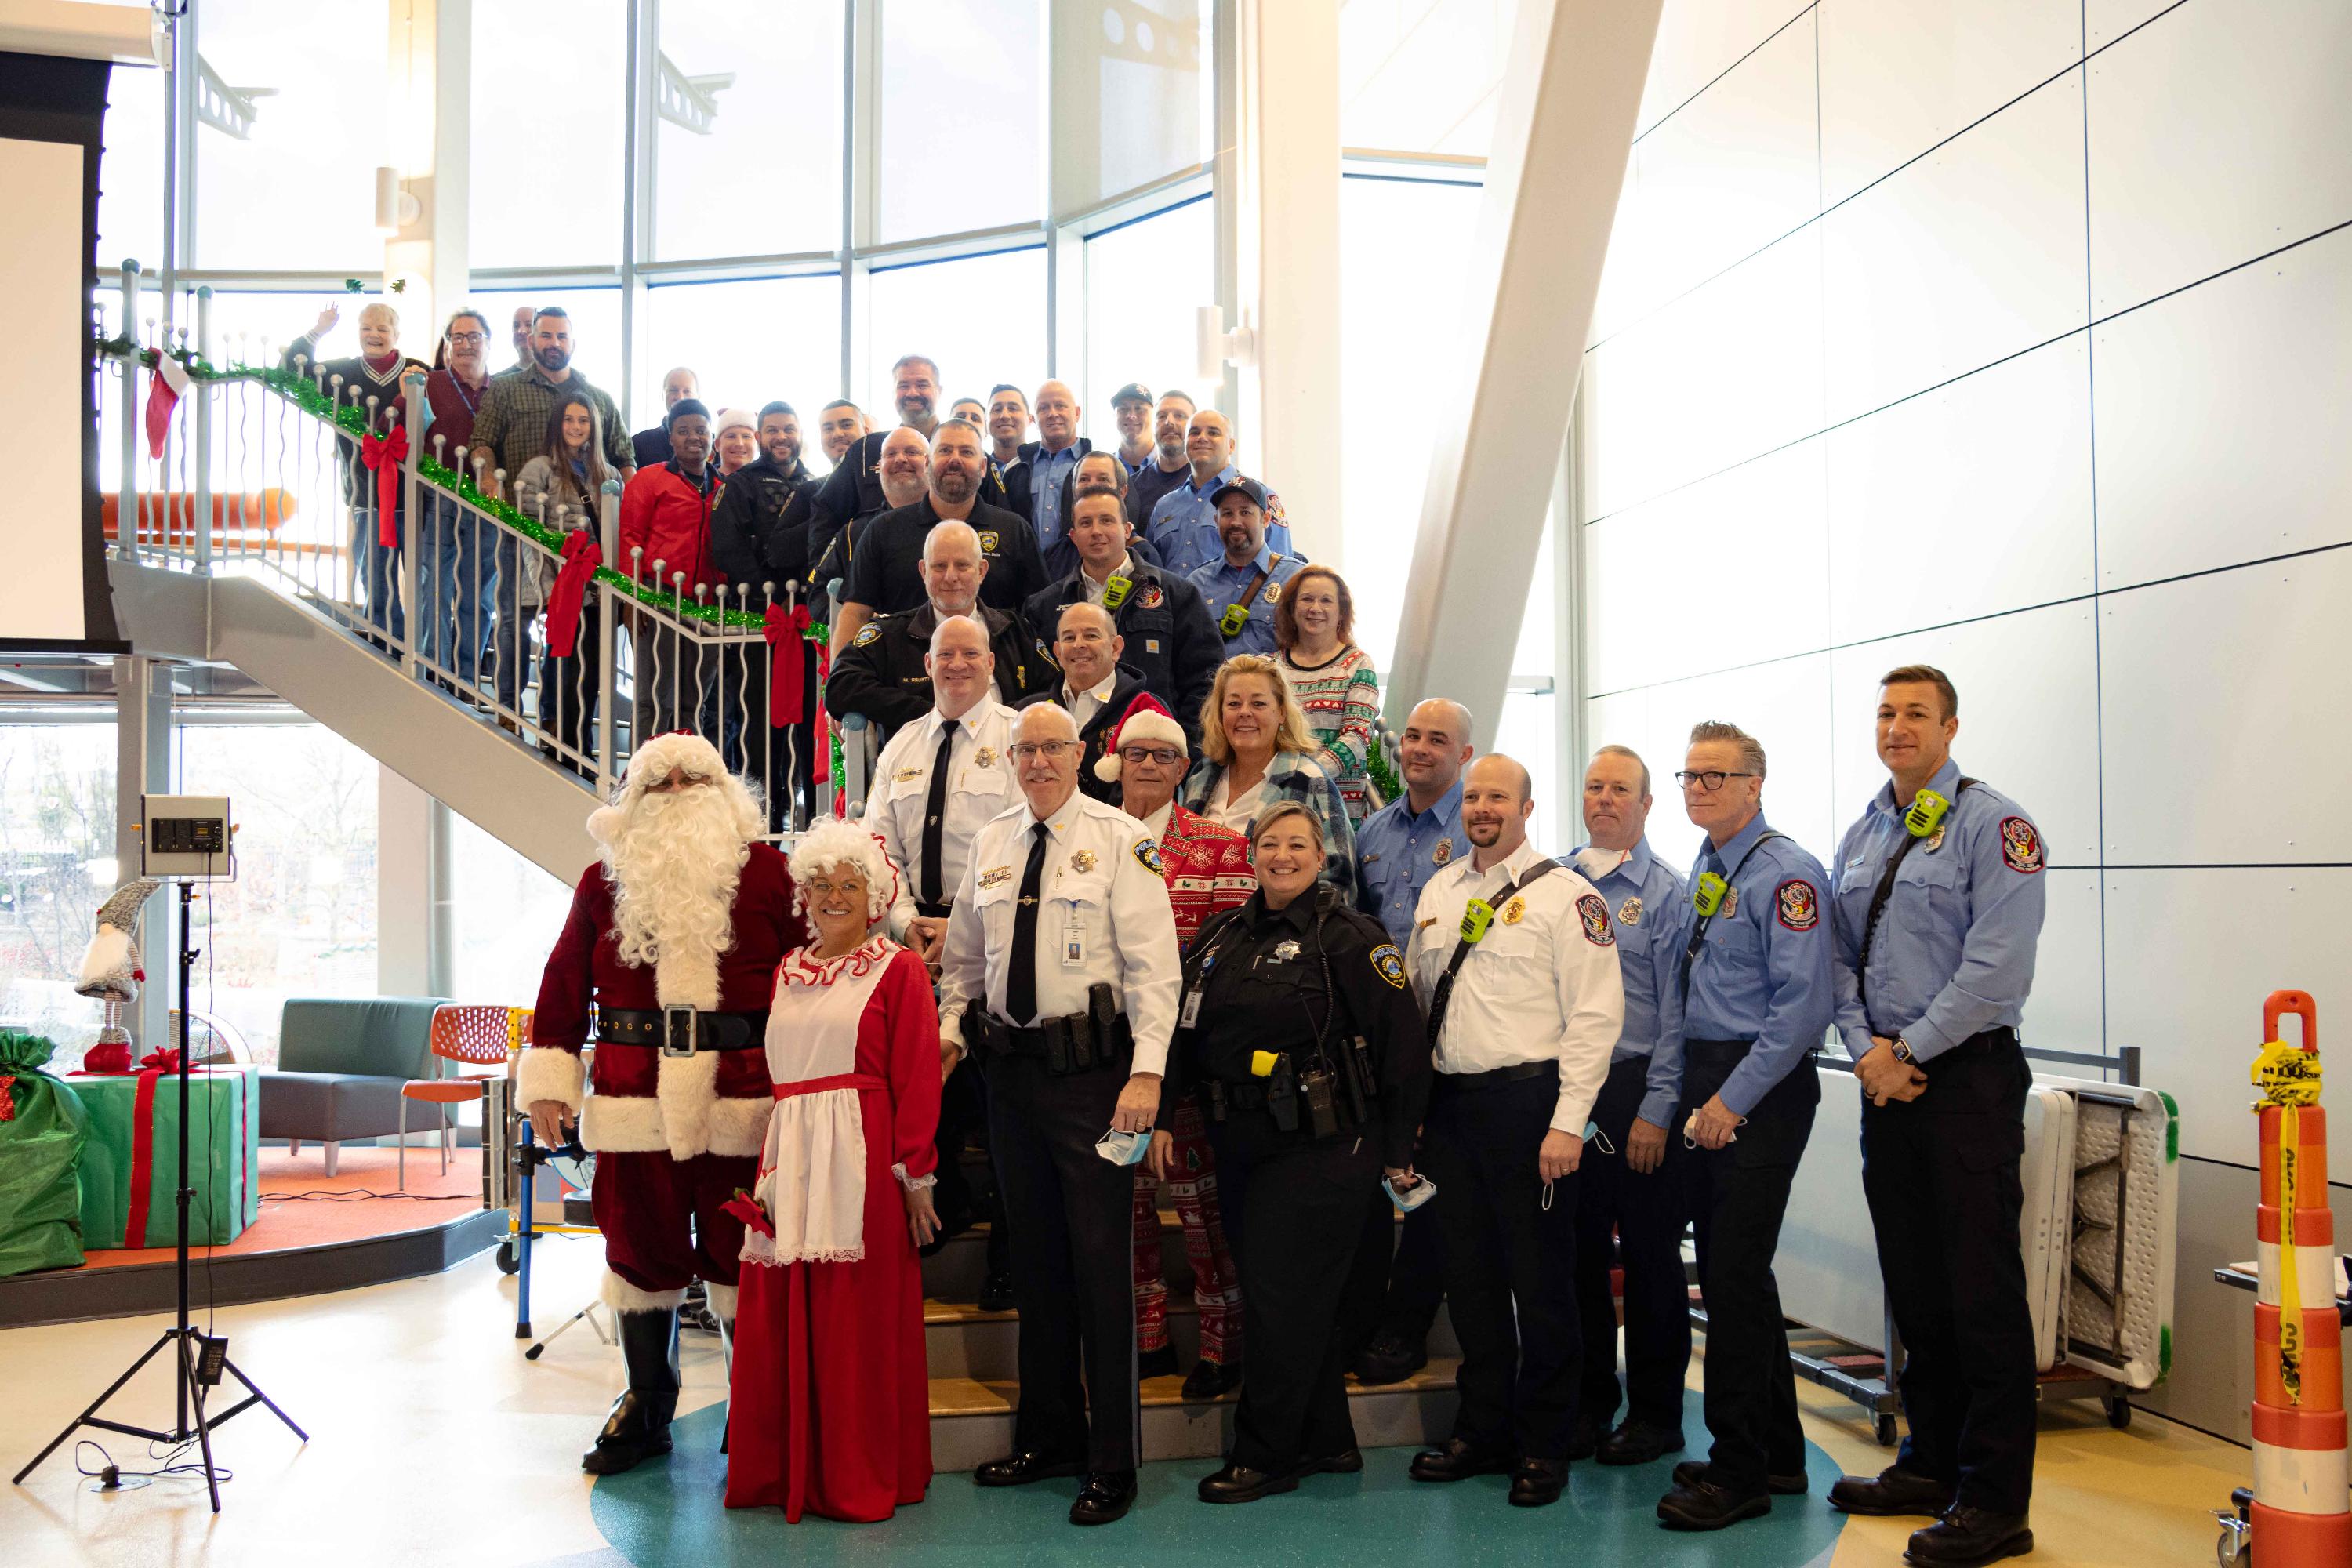 Santa, Mrs. Claus, and members of the Maryland Heights Police Department, Maryland Heights Fire Protection District, and Maryland Heights Government pose for a photo on a staircase at Ranken Jordan Pediatric Bridge Hospital